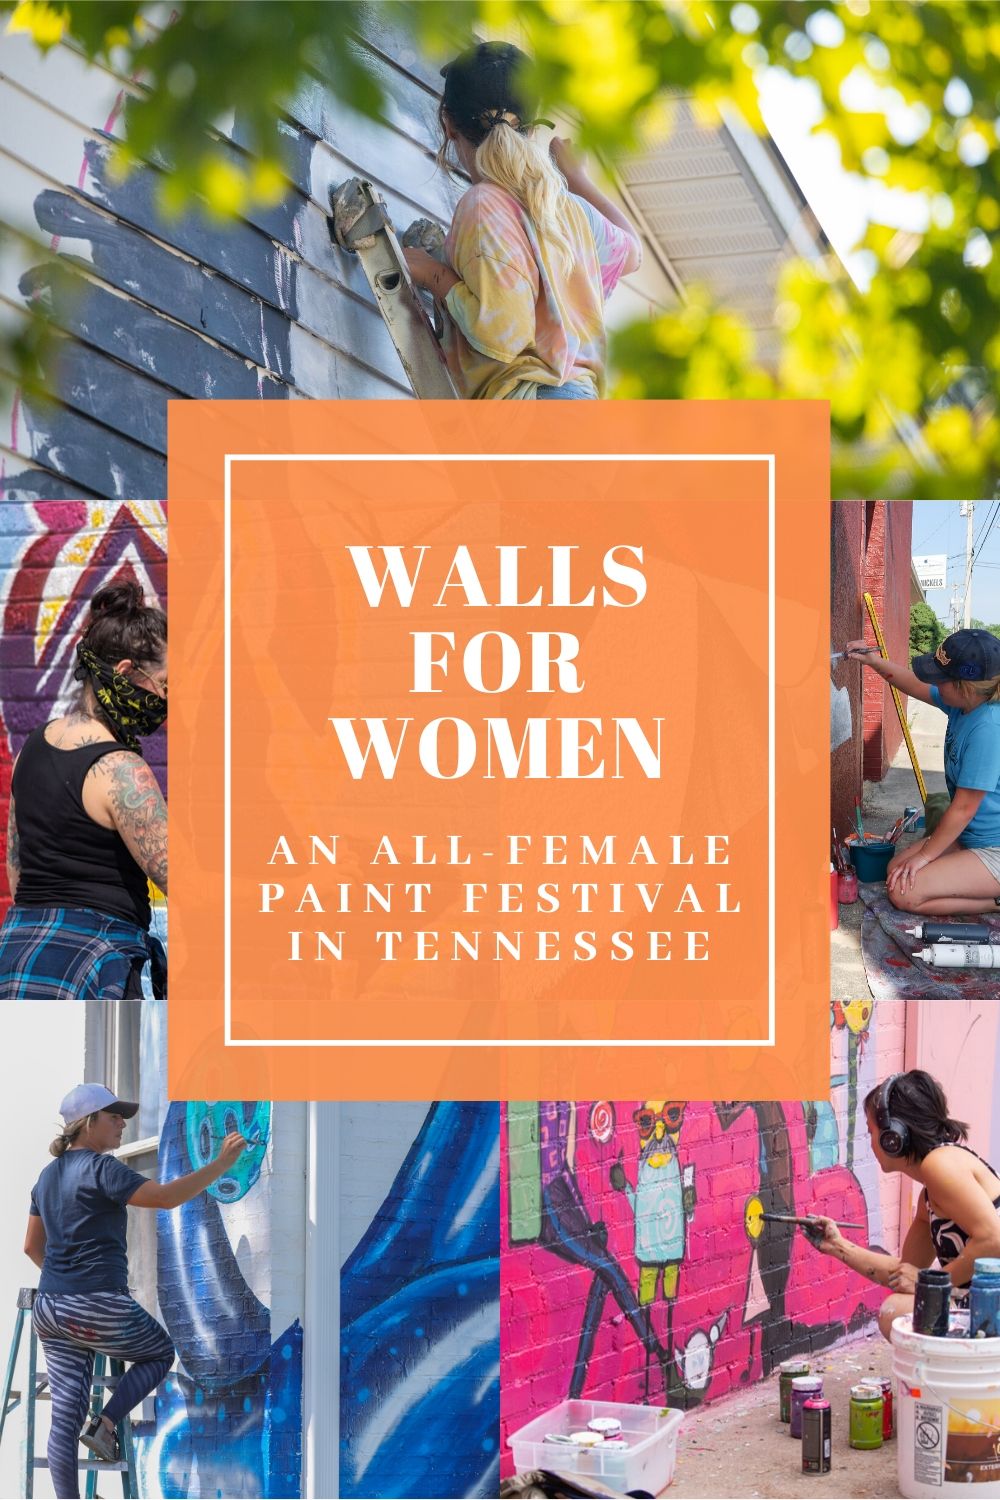 Walls for Women all-female mural festival in Tennessee